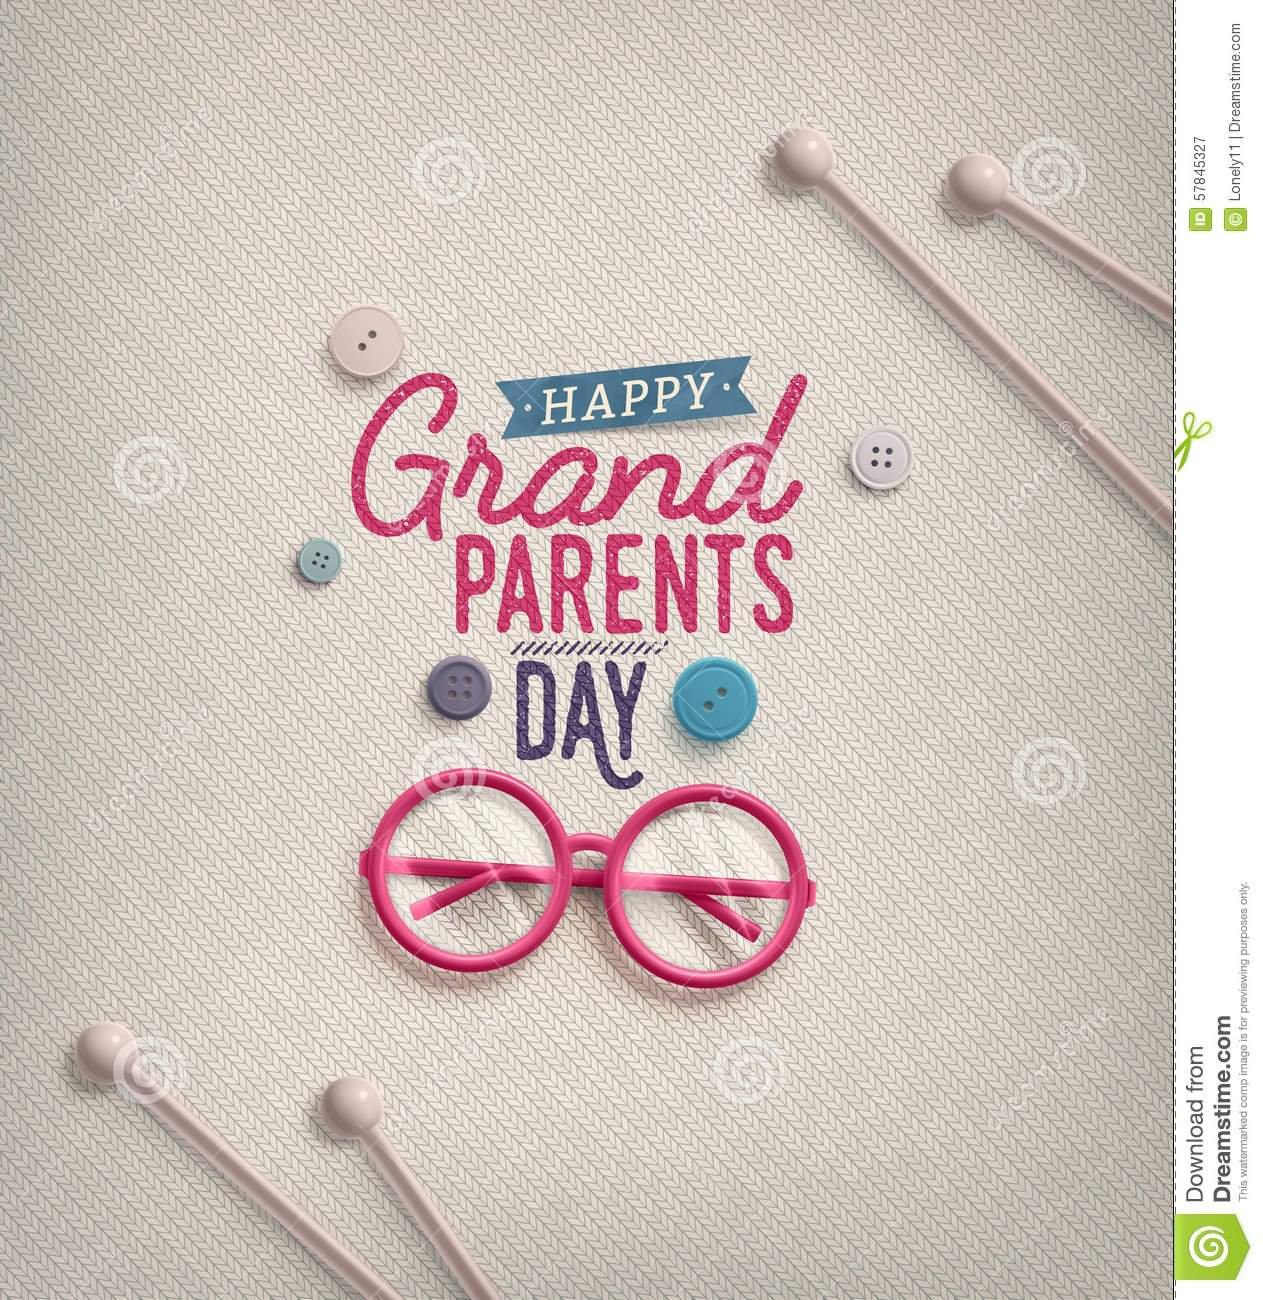 Birthday Cards For Grandma Ideas 35 Most Beautiful Grandparents Day Greeting Card Images